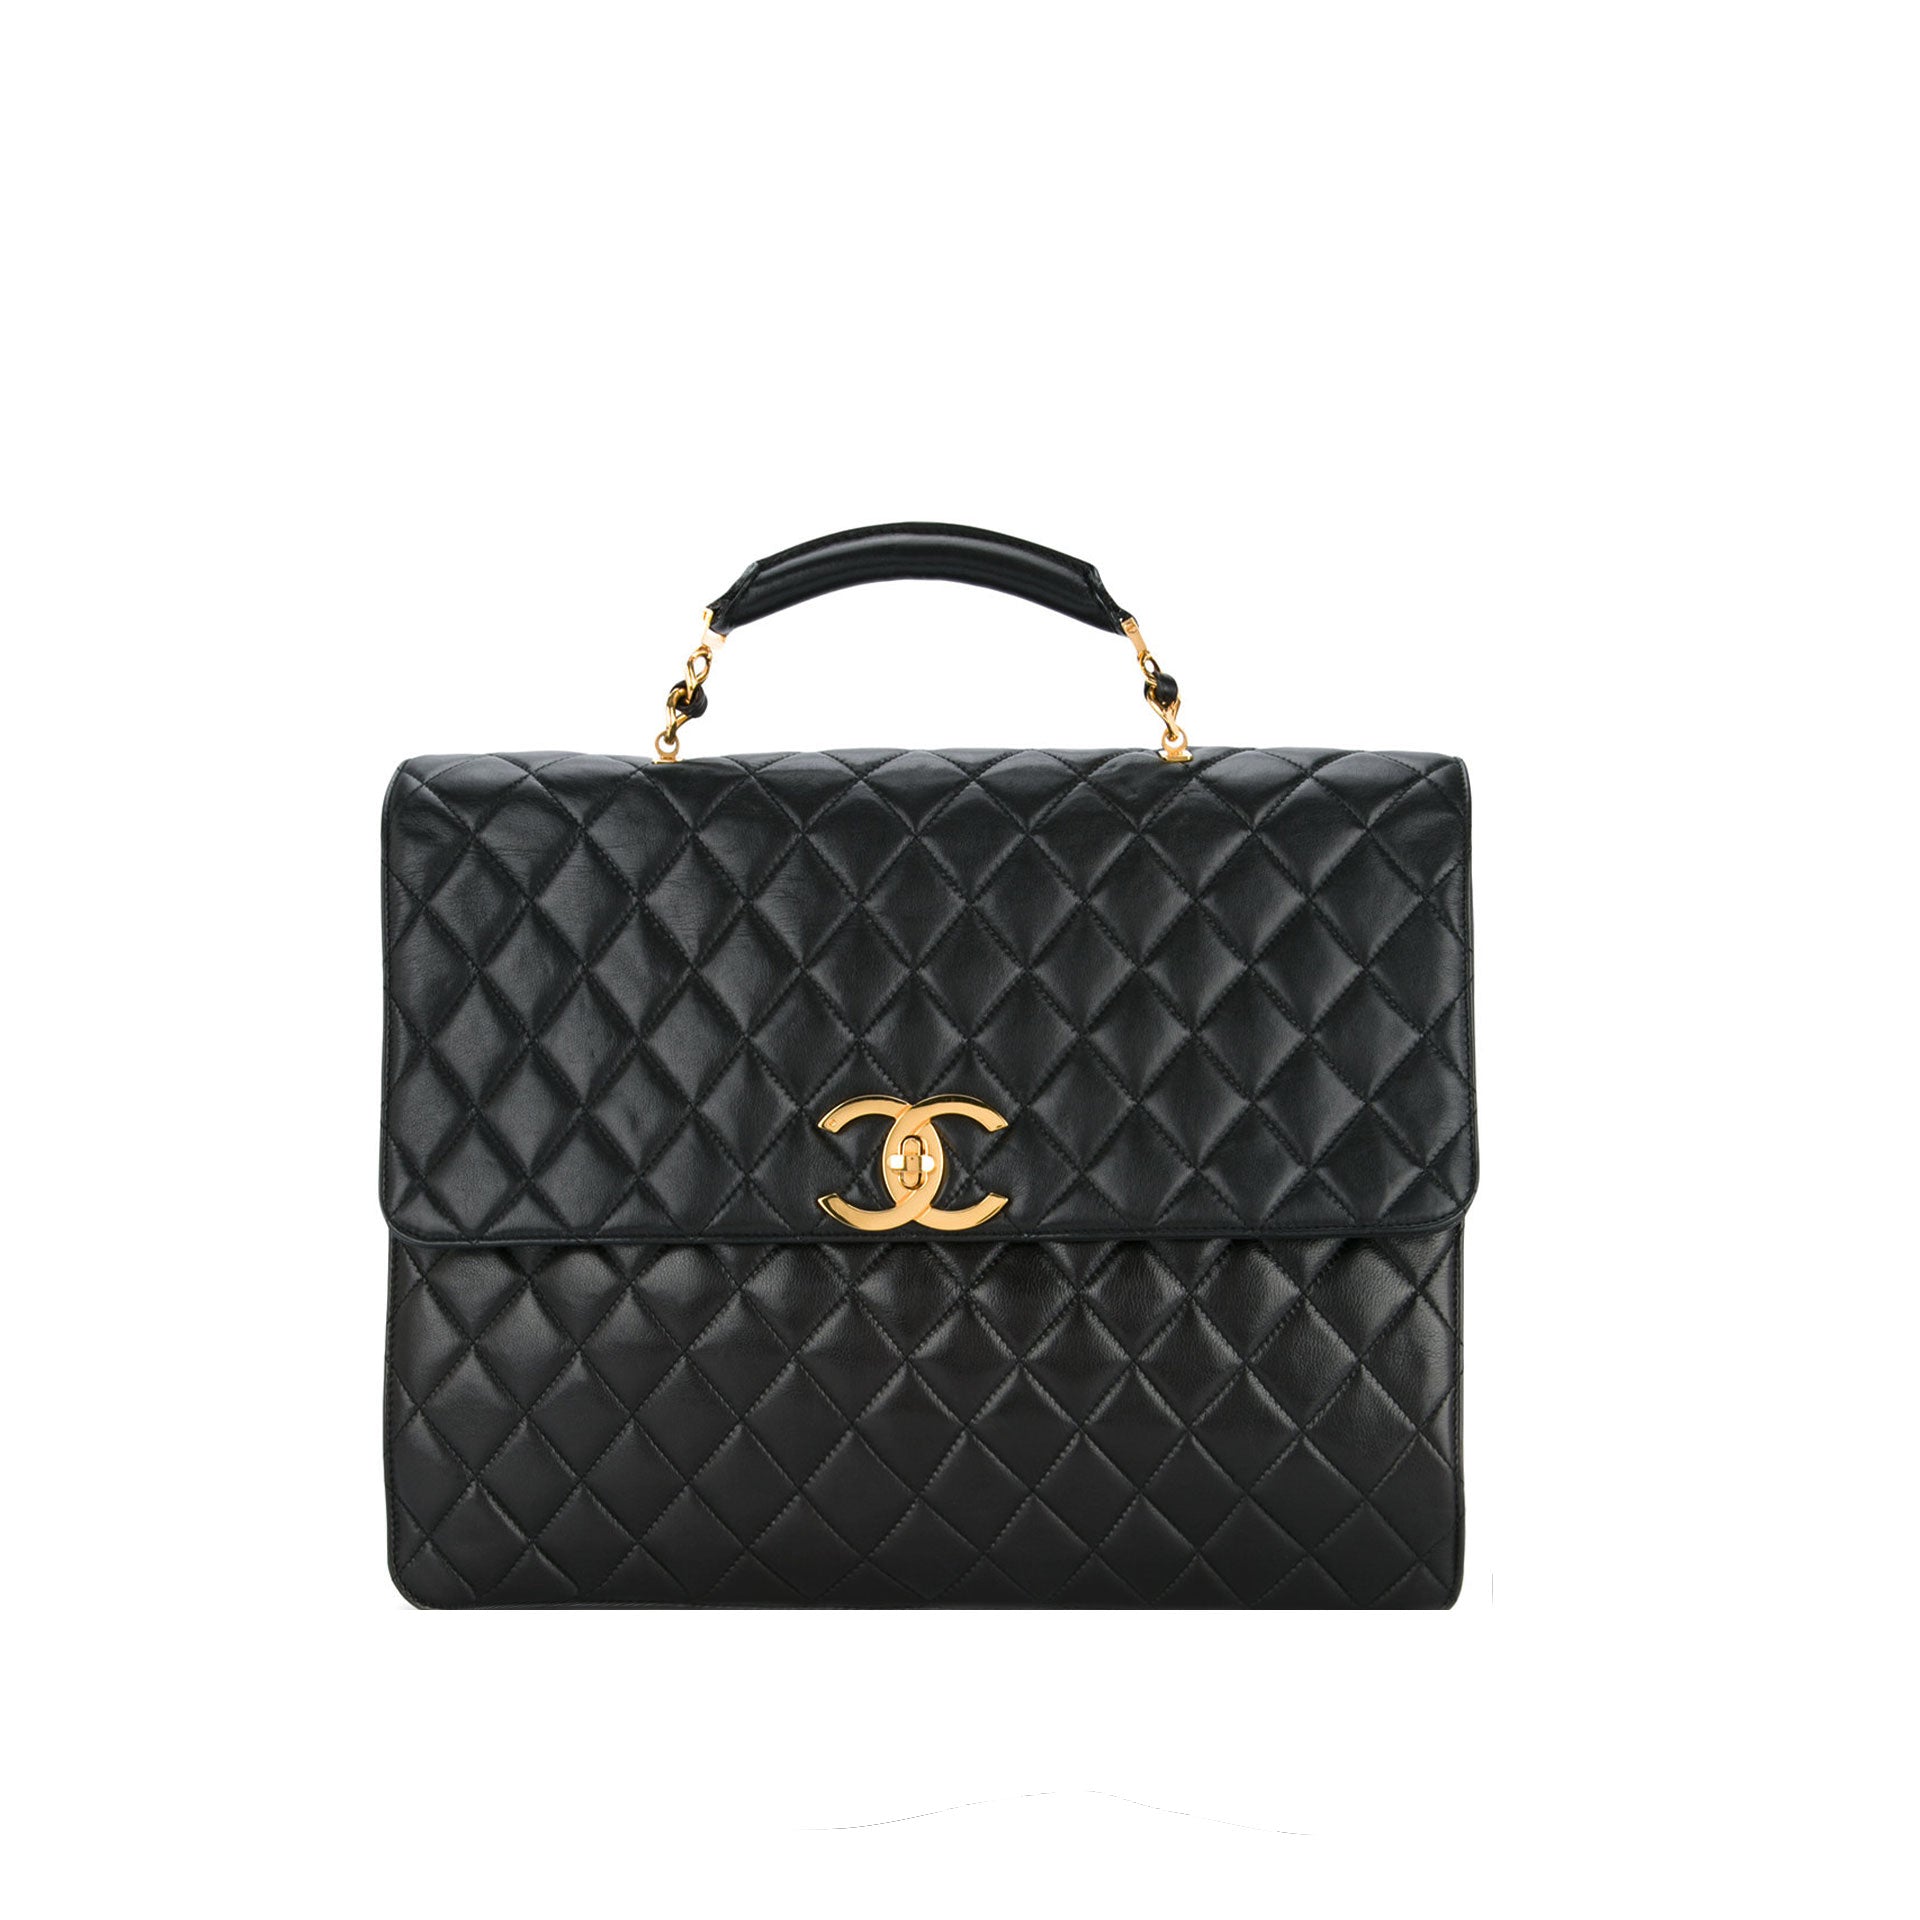 Impossible-to-Find Chanel Handbags Are House of Carver's Stock-in-Trade